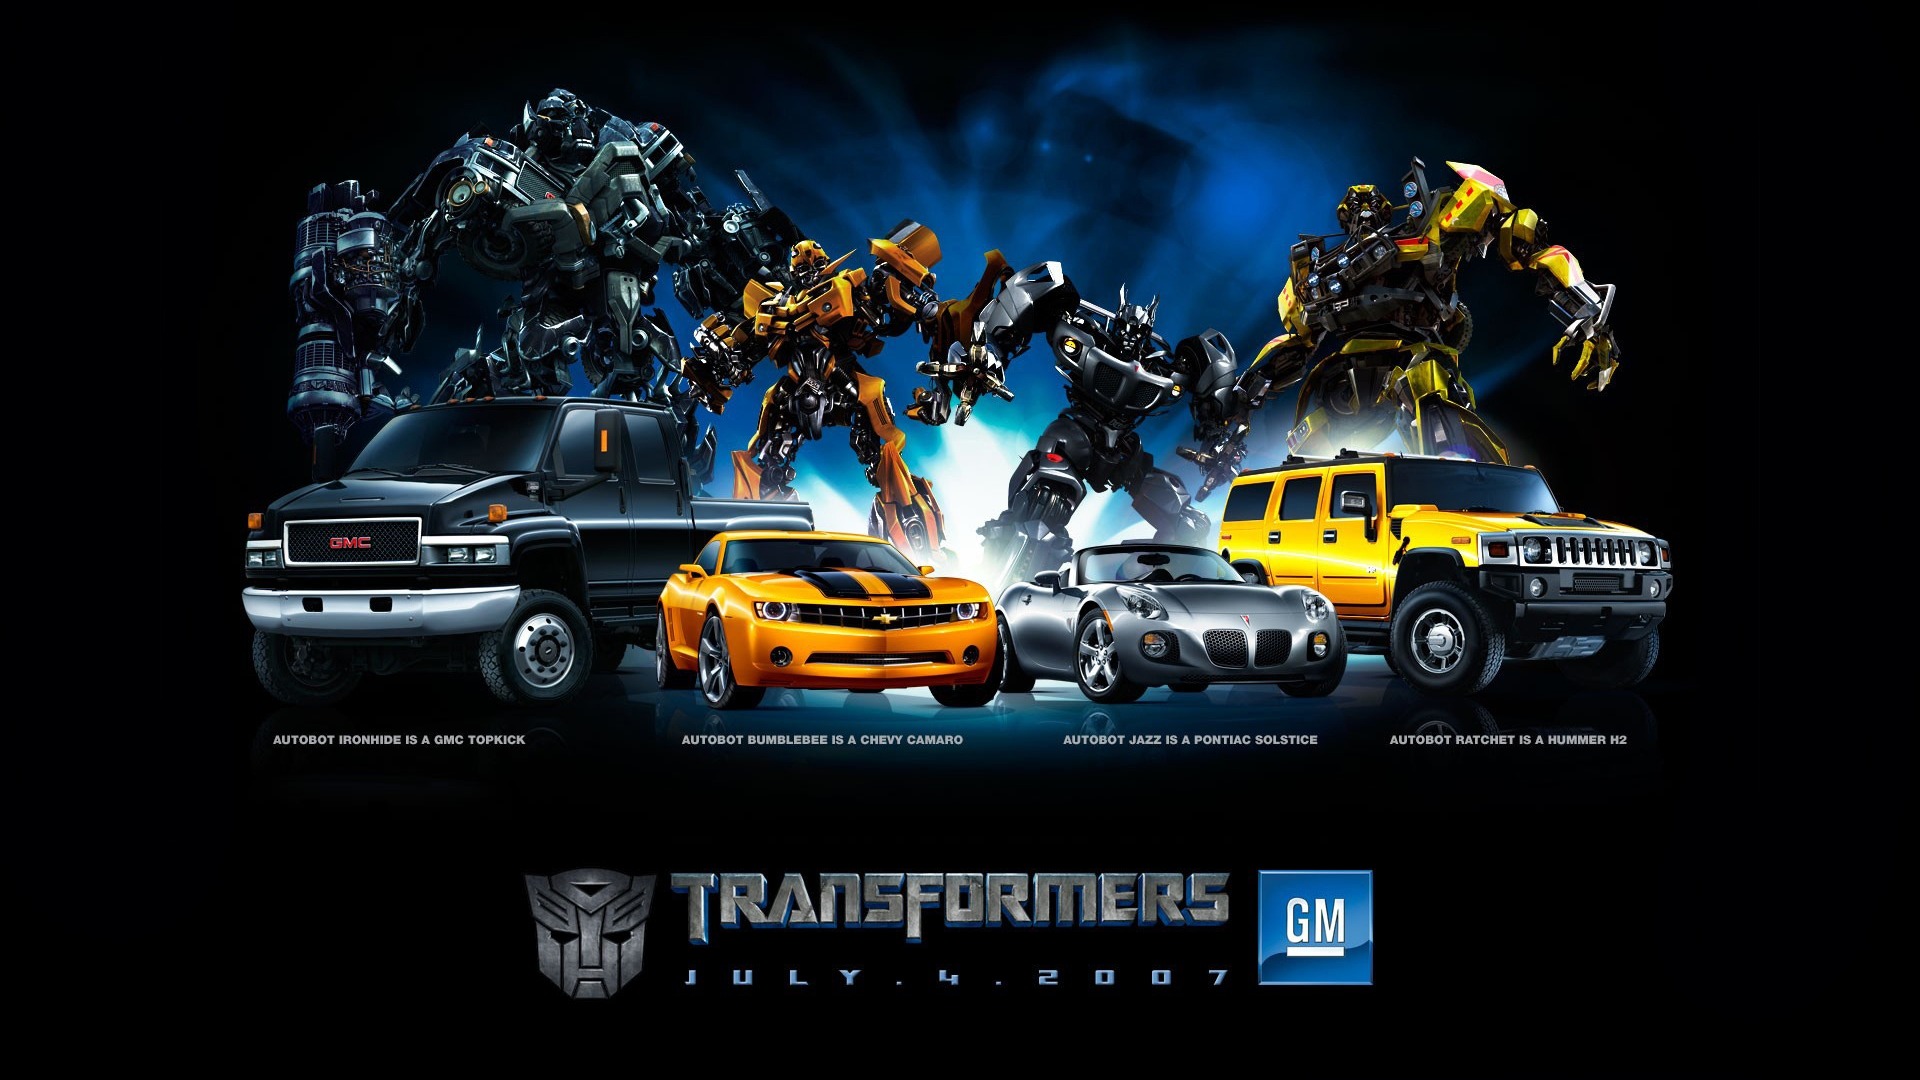 Transformers 3 Dark of the Moon HD Movie Wallpapers second series